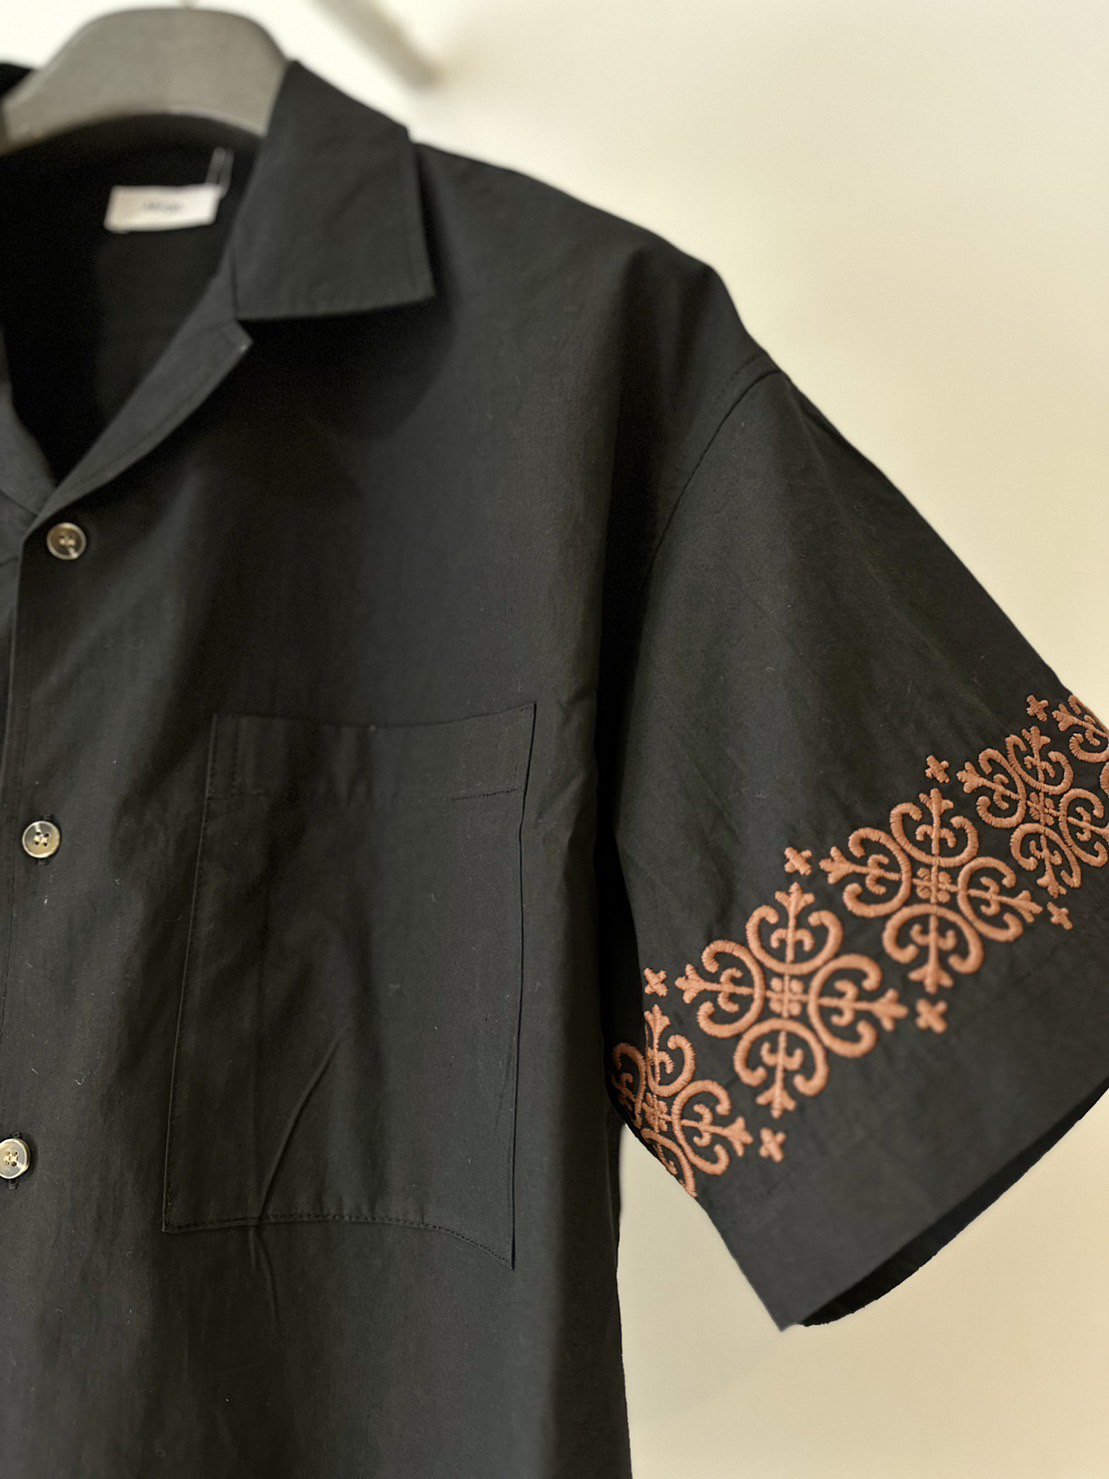 ALLEGE<br />Stitchi S/S Shirt / Black<img class='new_mark_img2' src='https://img.shop-pro.jp/img/new/icons14.gif' style='border:none;display:inline;margin:0px;padding:0px;width:auto;' />